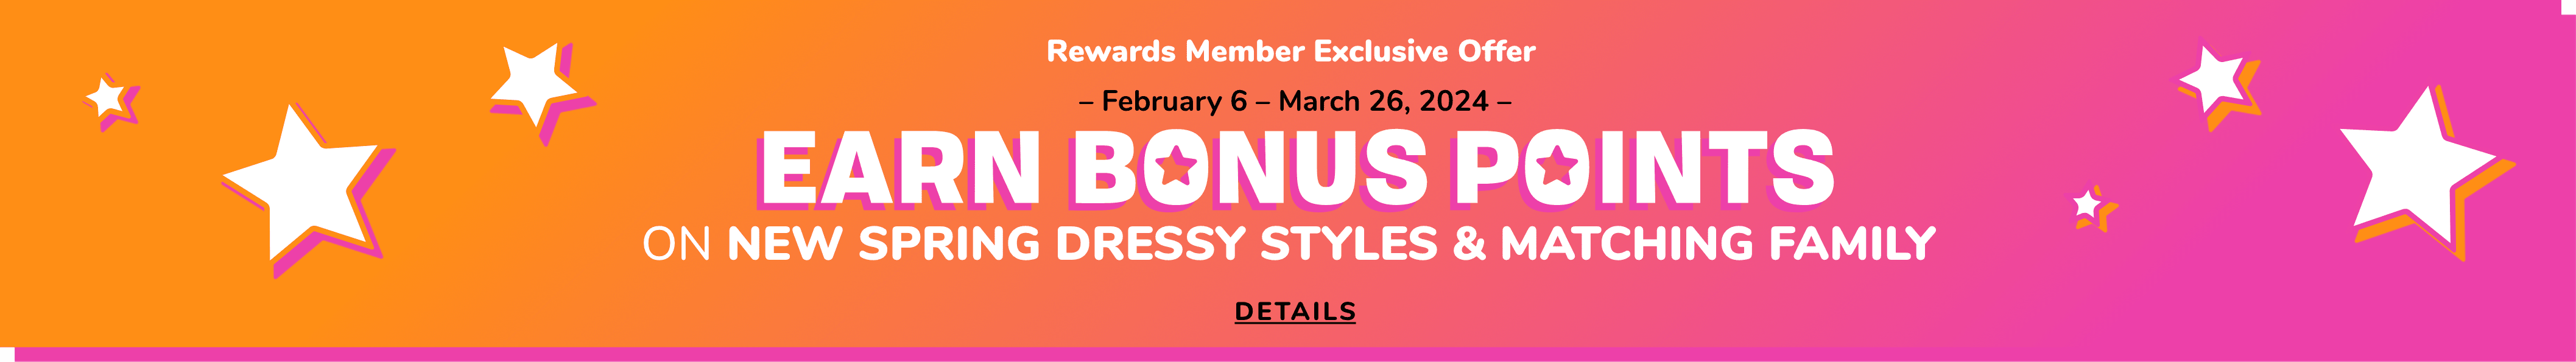 Rewards Member Exclusive. Limited Time Only-Earn Bonus Points ON NEW SPRING DRESSY STYLES & MATCHING FAMILY